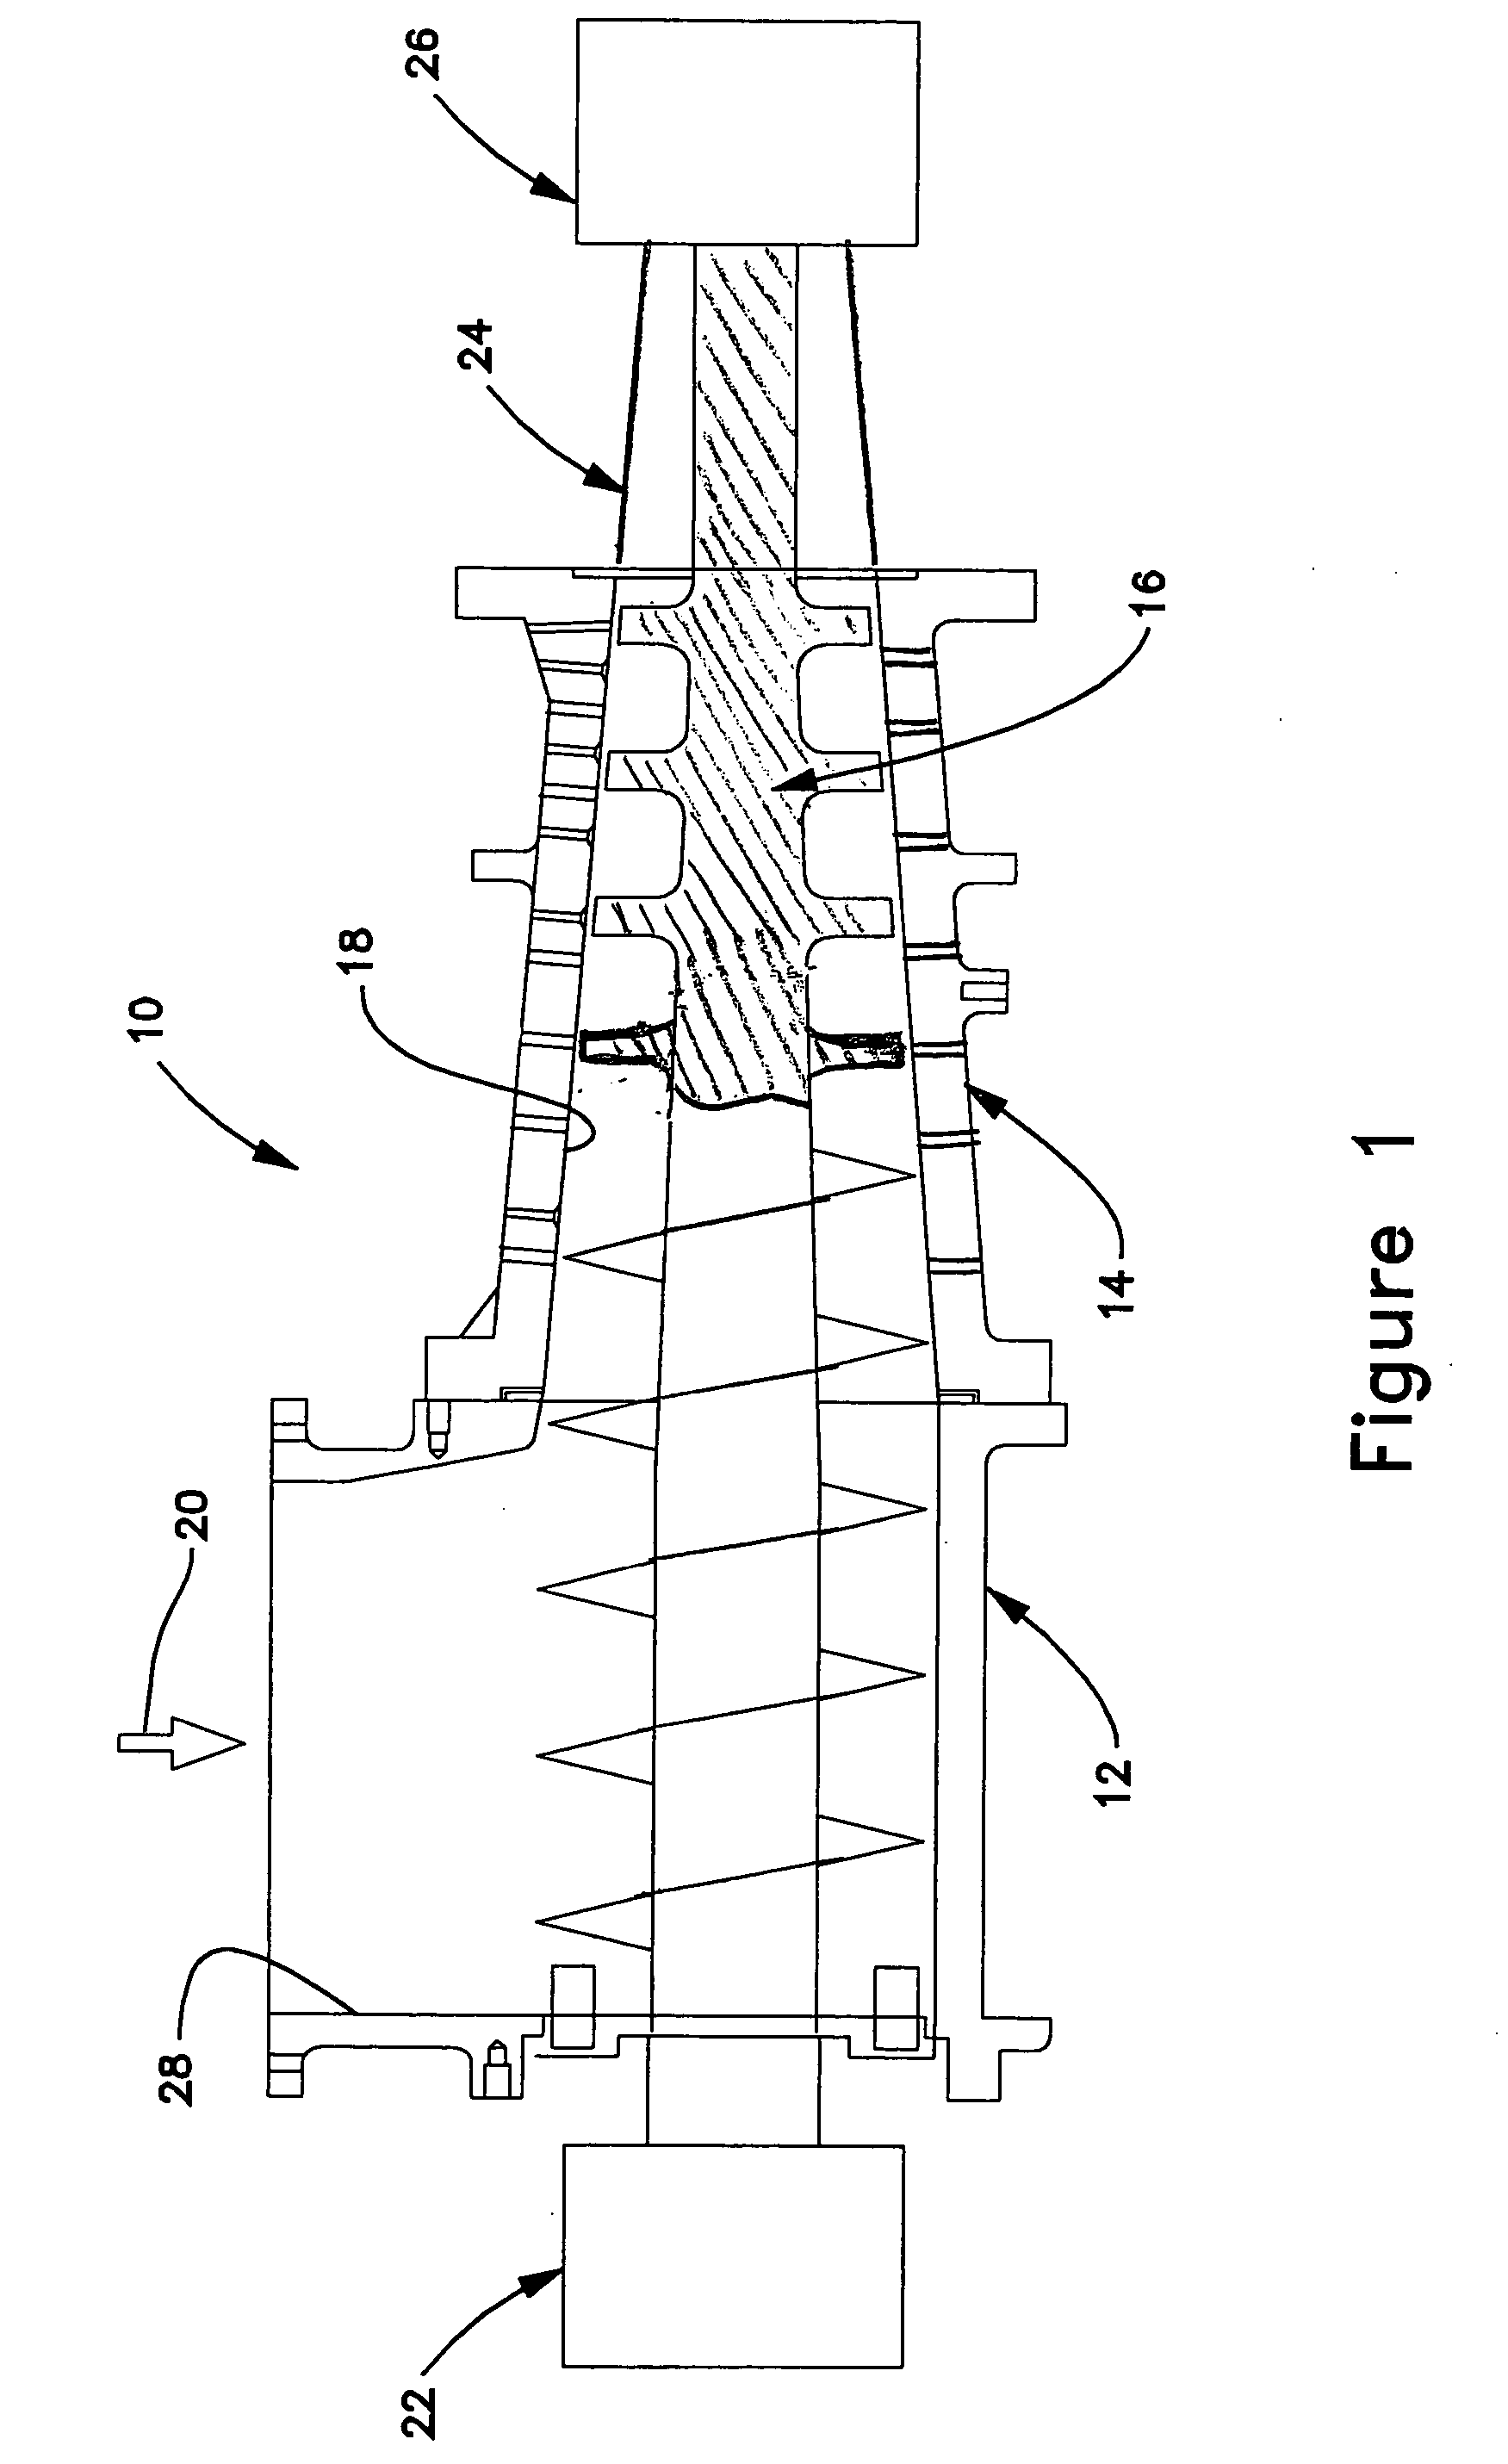 Compression screw with combination single and double flights